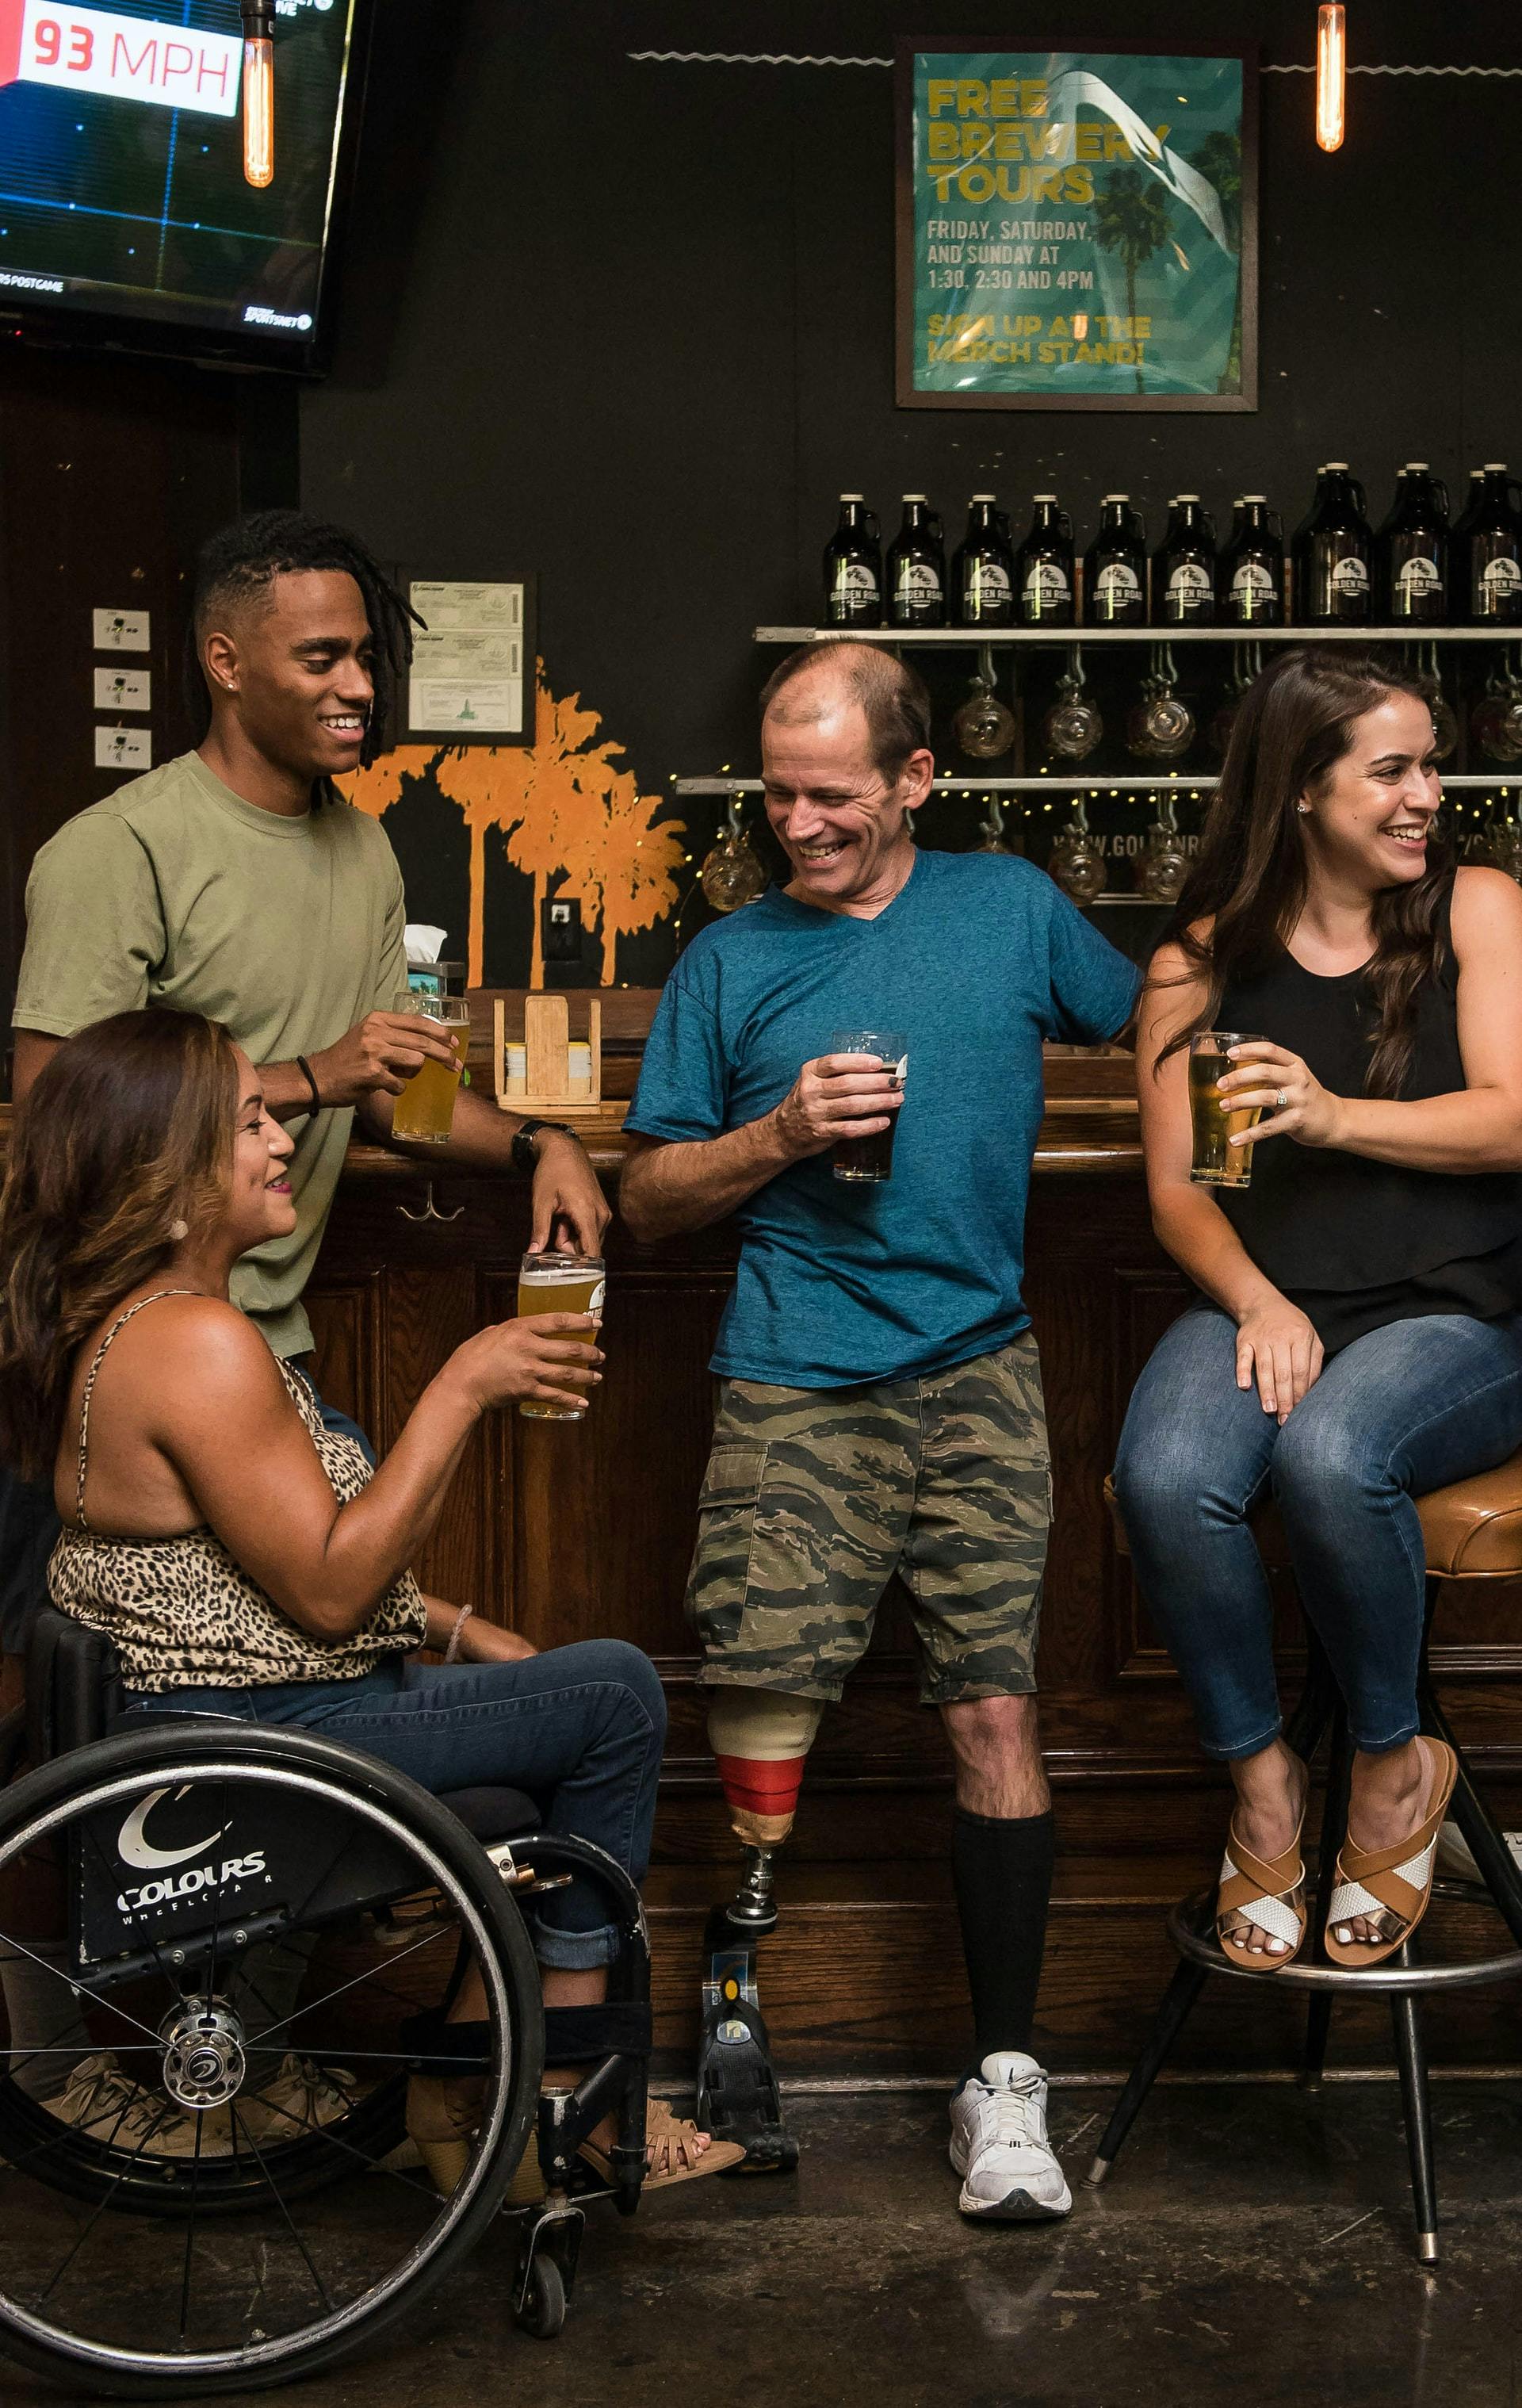 group of people holding drinks hanging out at a bar.